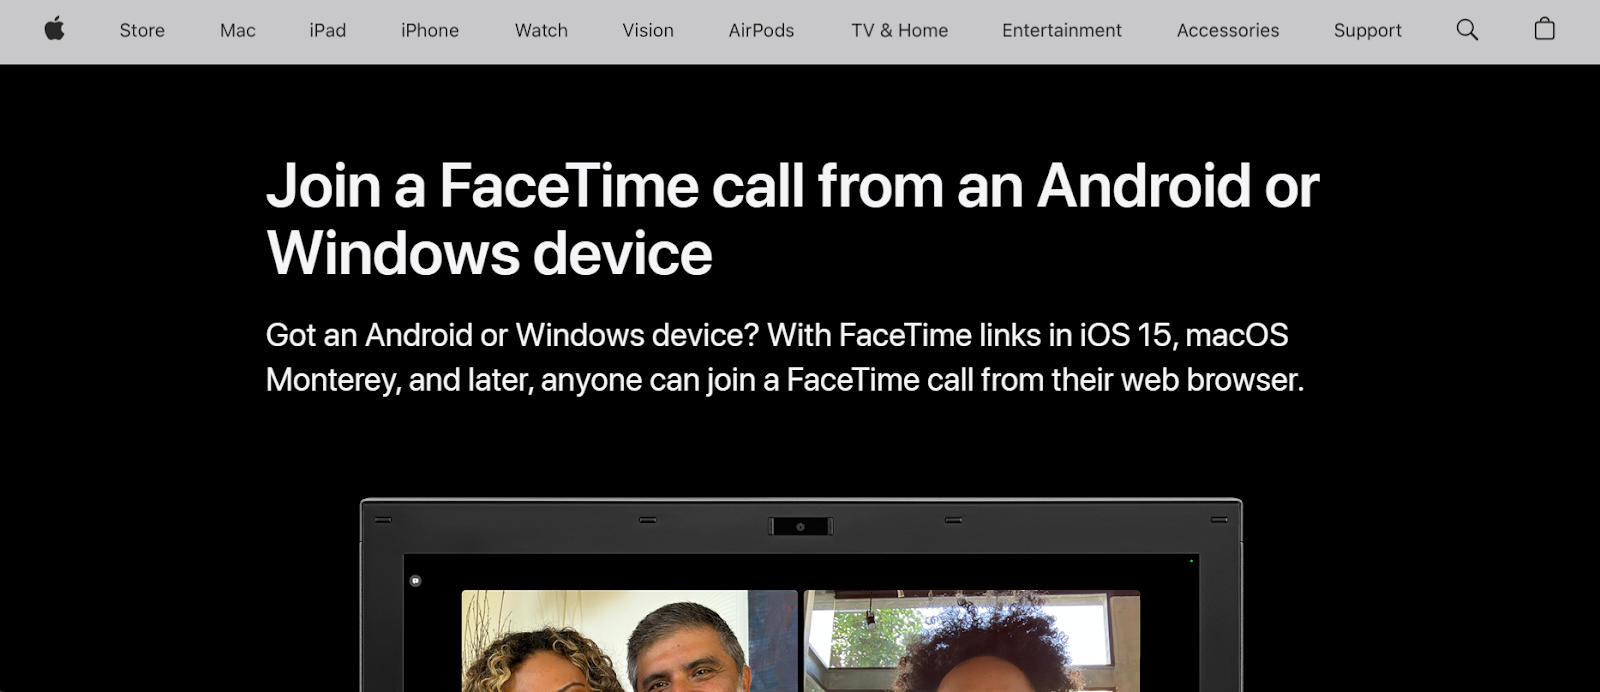 FaceTime website snapshot highlighting the services it offers.